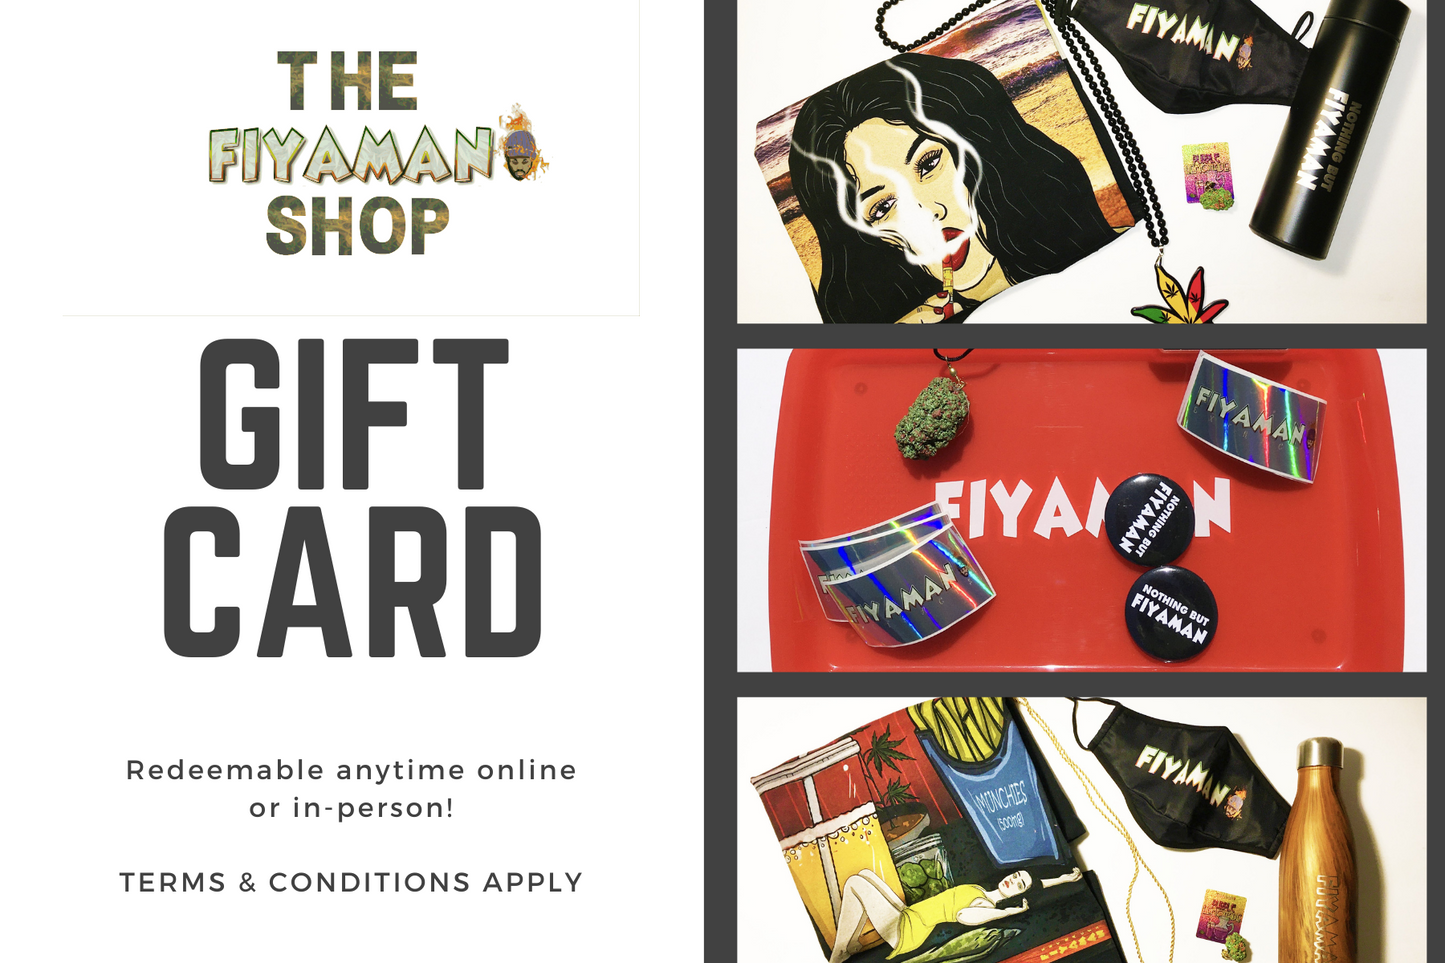 The GIFT CARD